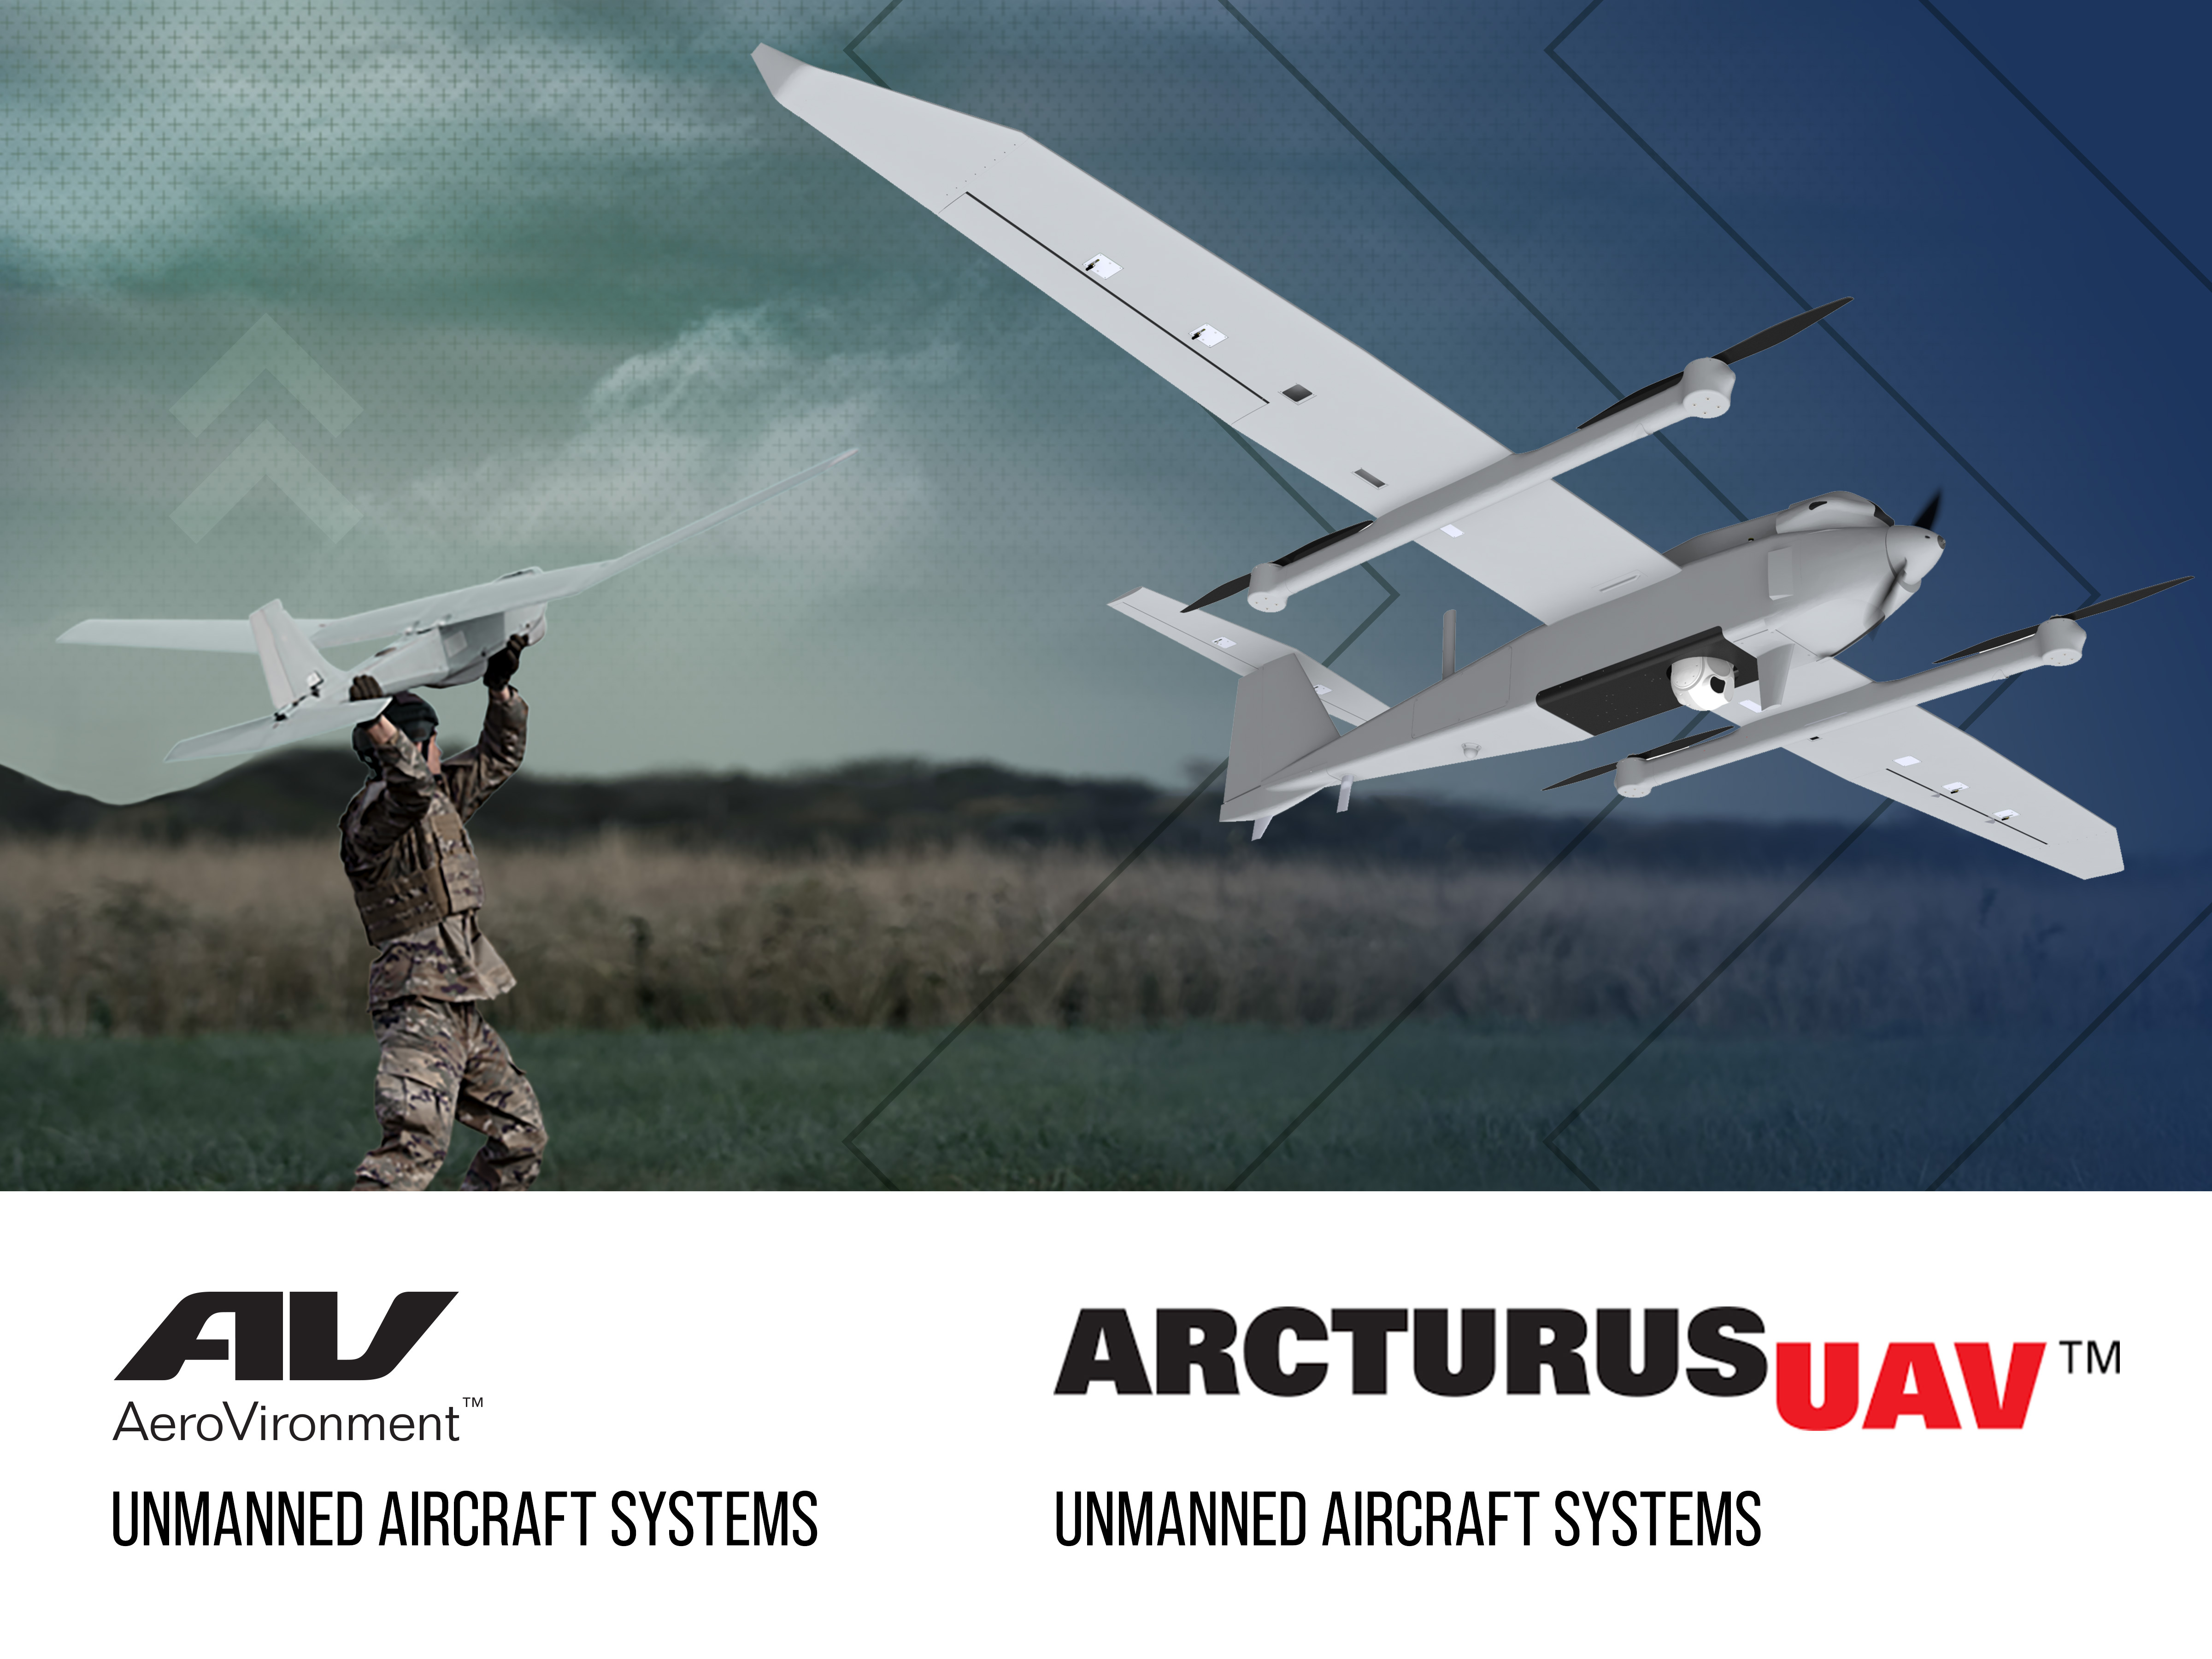 | Portfolio Aircraft Wire Segments Reach Expanding UAV, Business Unmanned Acquire Group and to and 3 into 2 Systems AeroVironment Arcturus Product